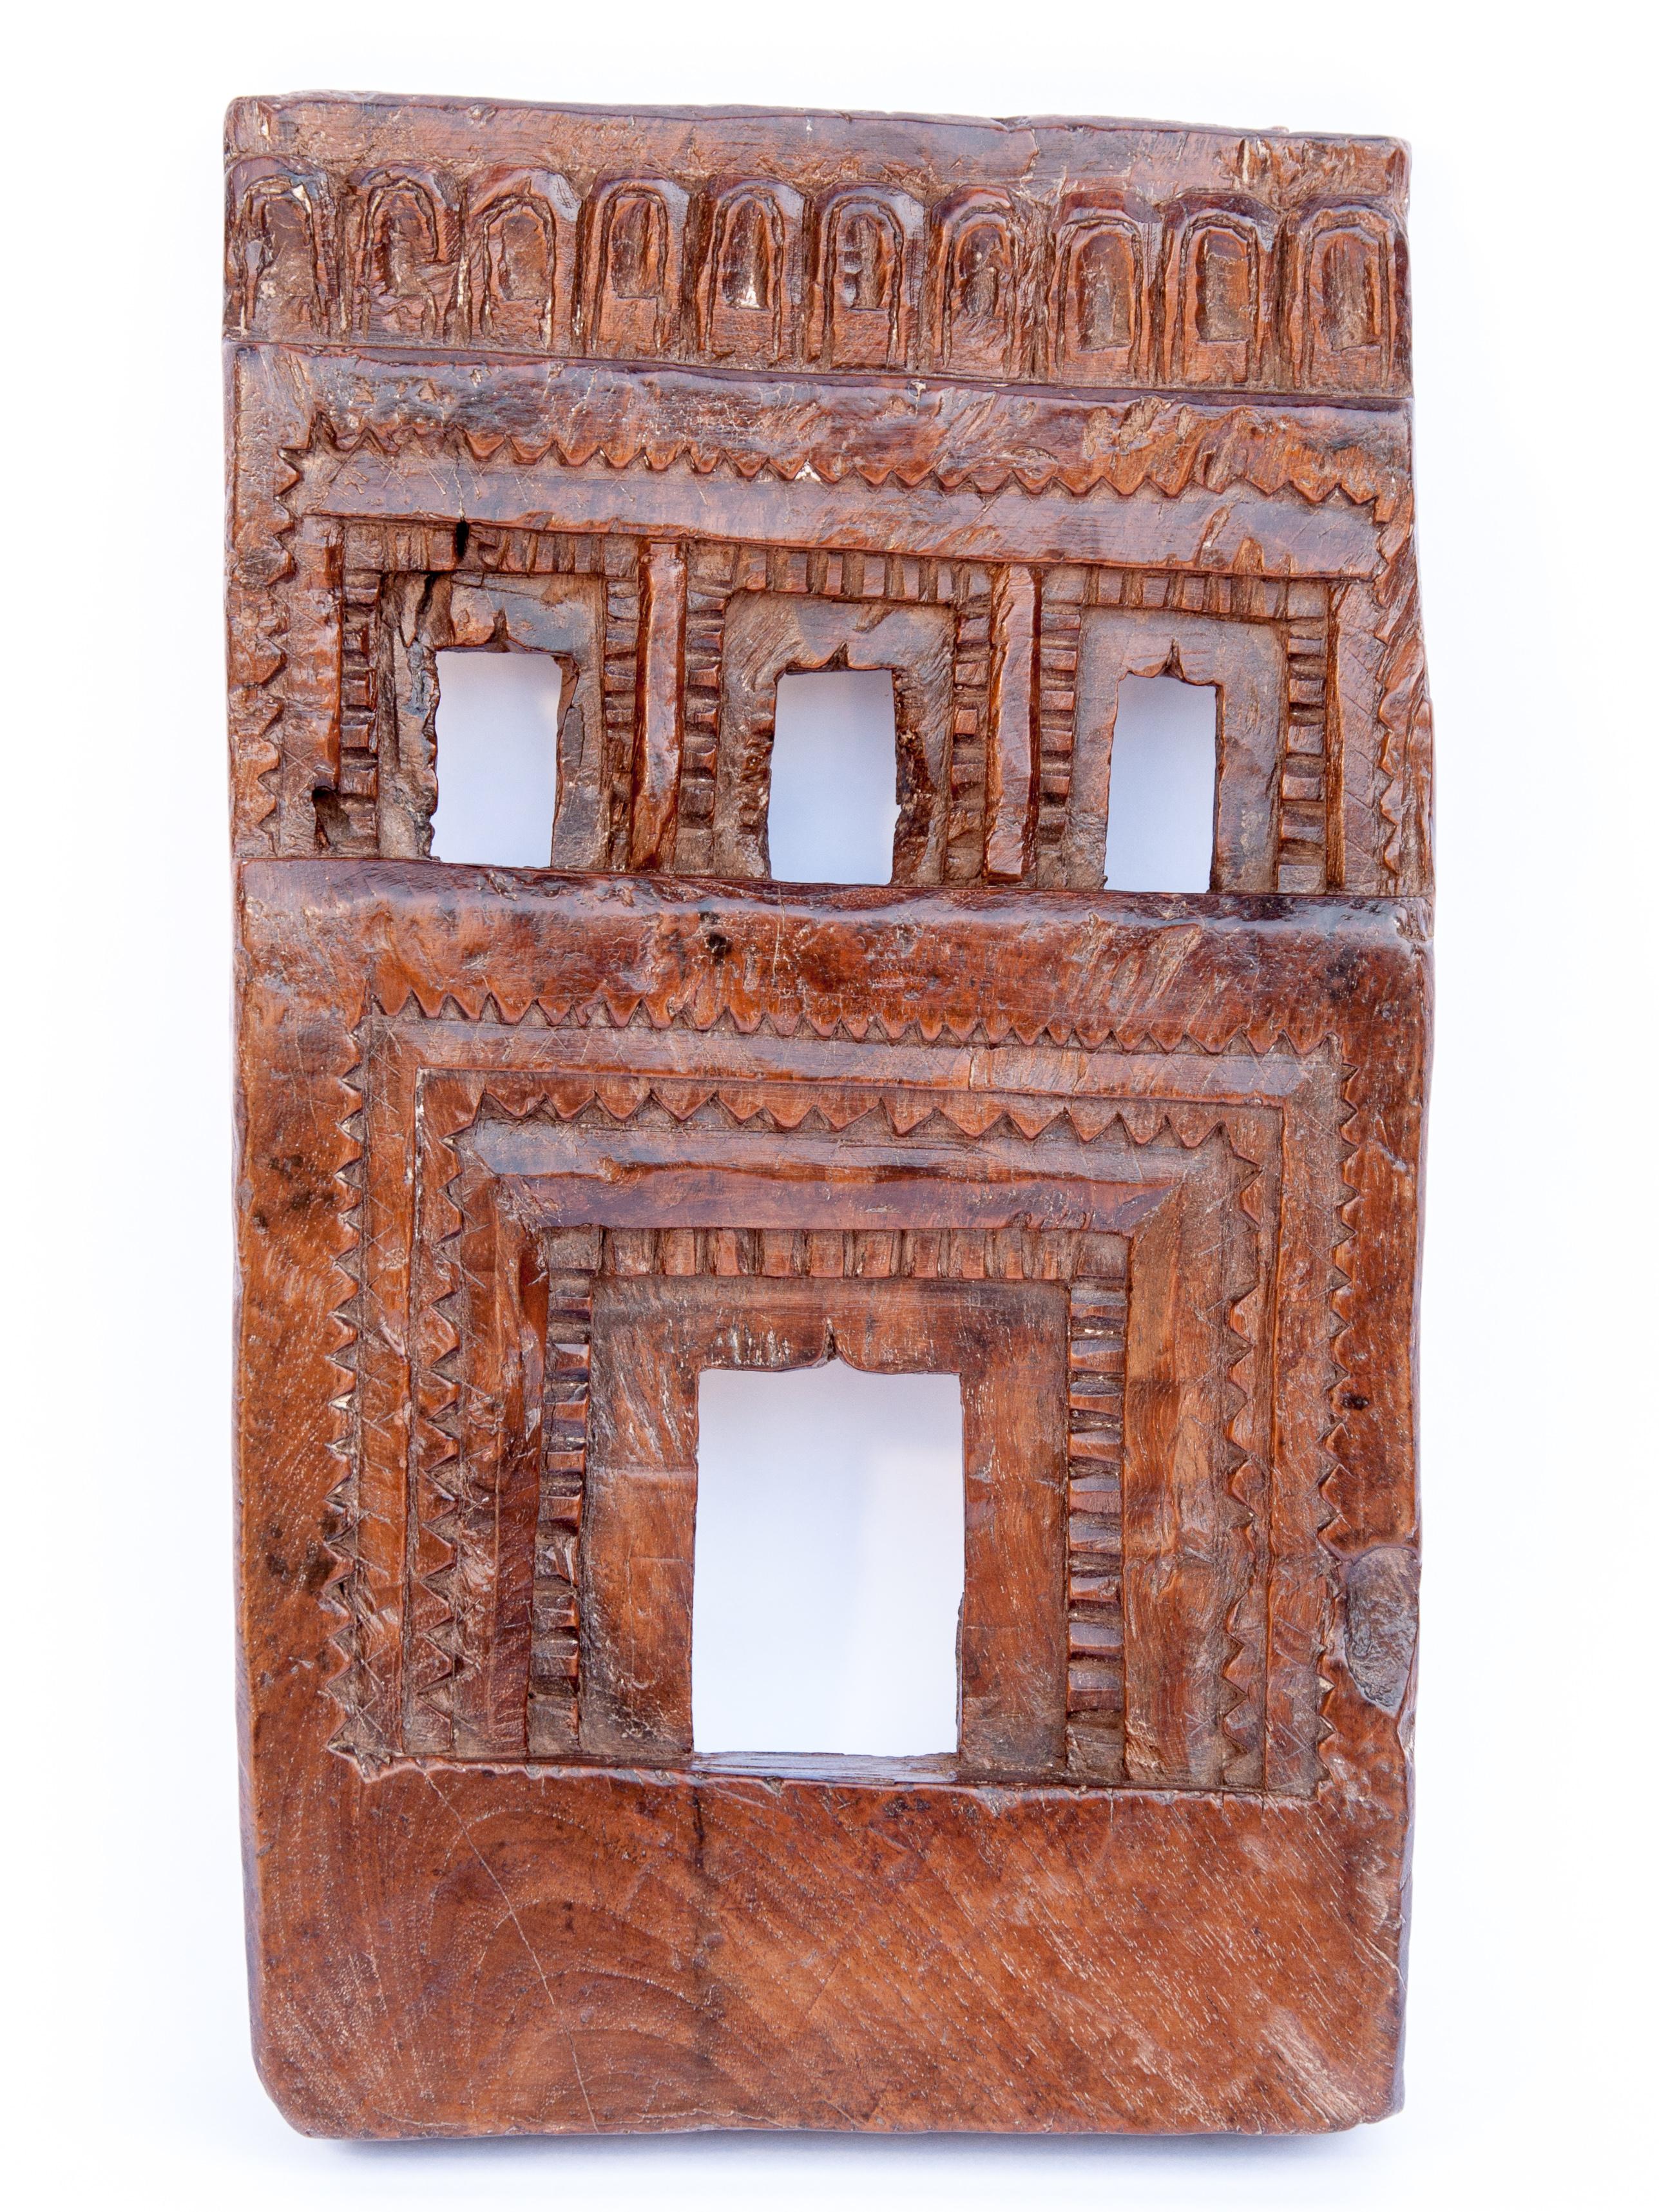 Indian Set of 3 Vintage Carved Wood Votive or Picture Frames, Mid-20th Century, India.